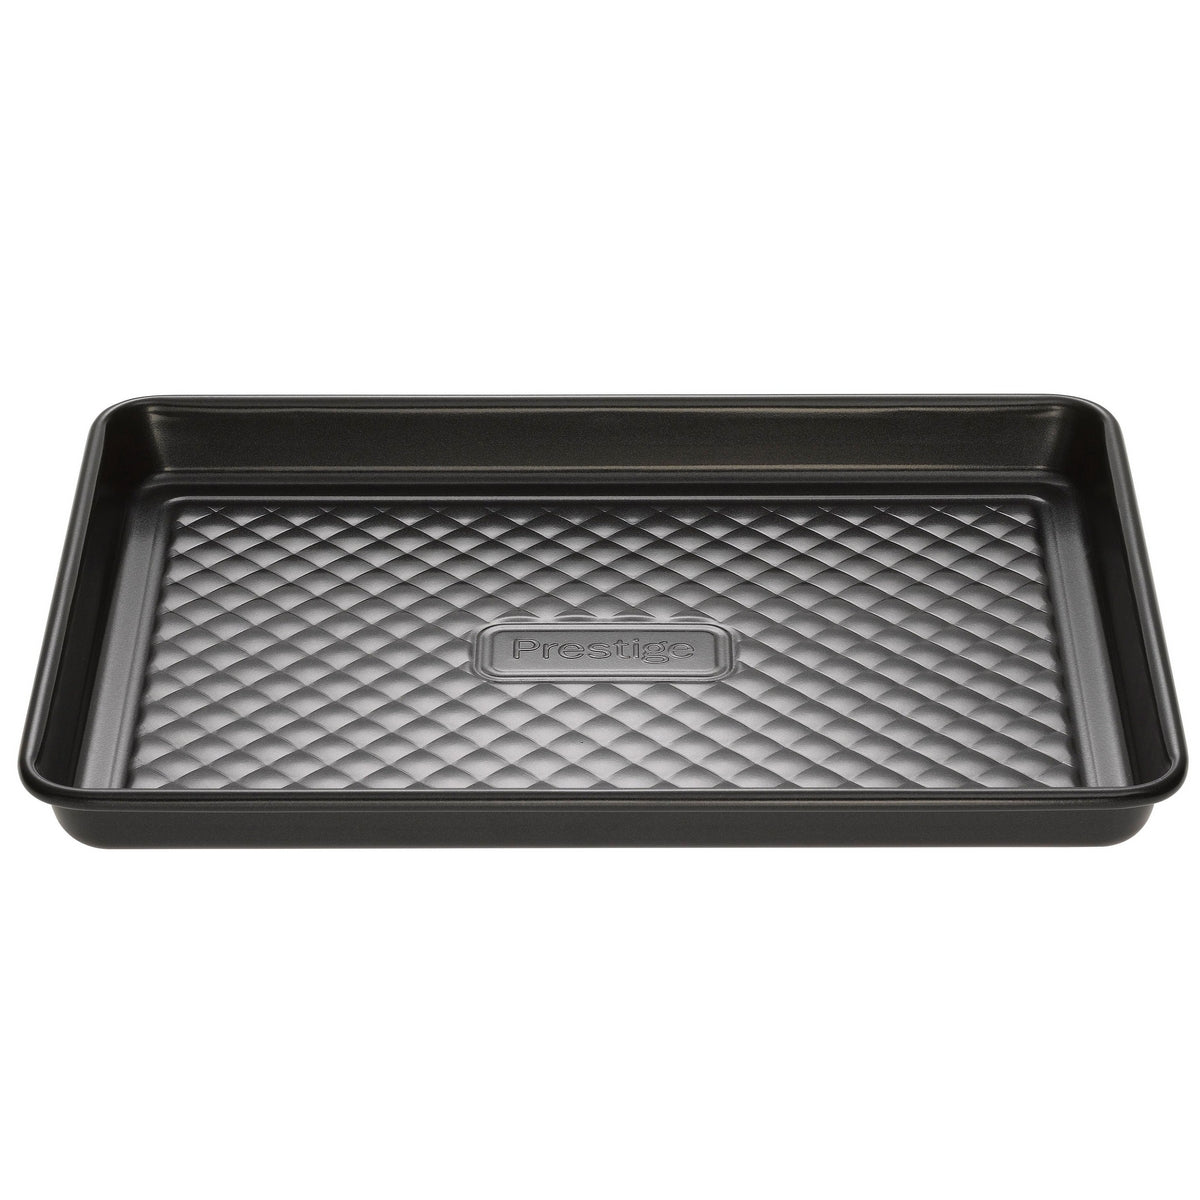 Prestige Inspire Bakeware Baking Tray, Small - Black Home and beyond